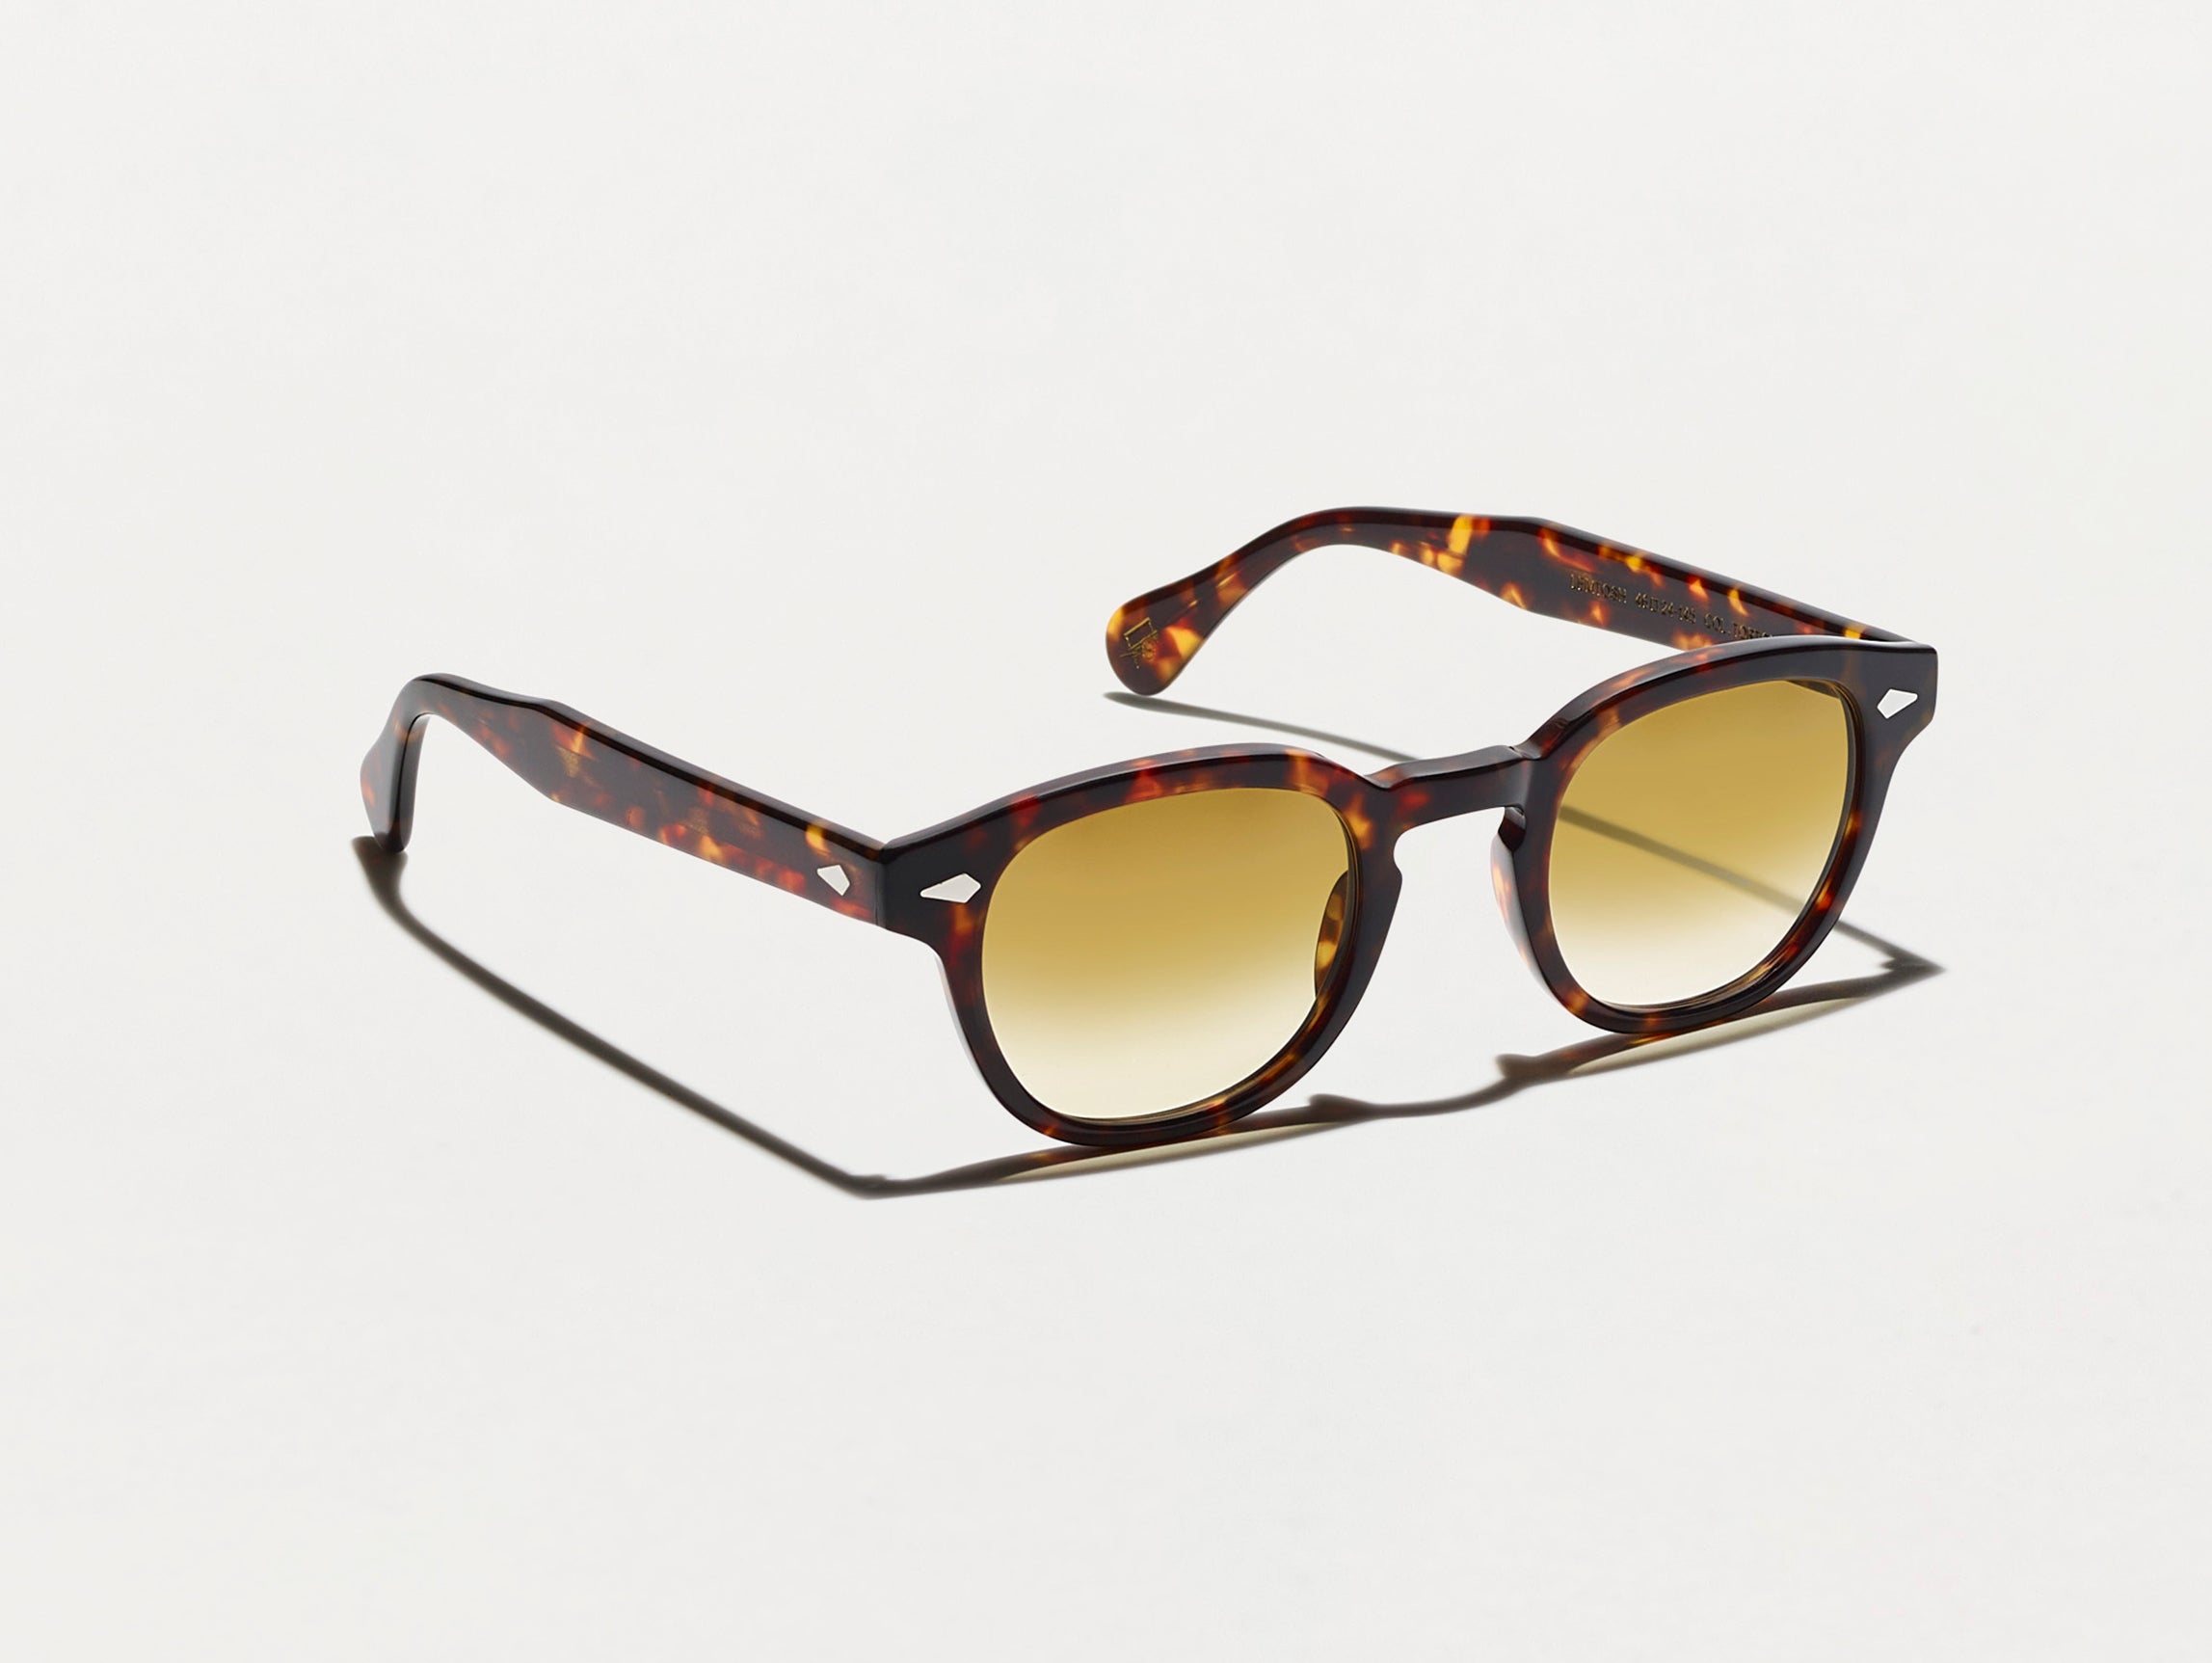 The LEMTOSH Tortoise with Chestnut Fade Tinted Lenses